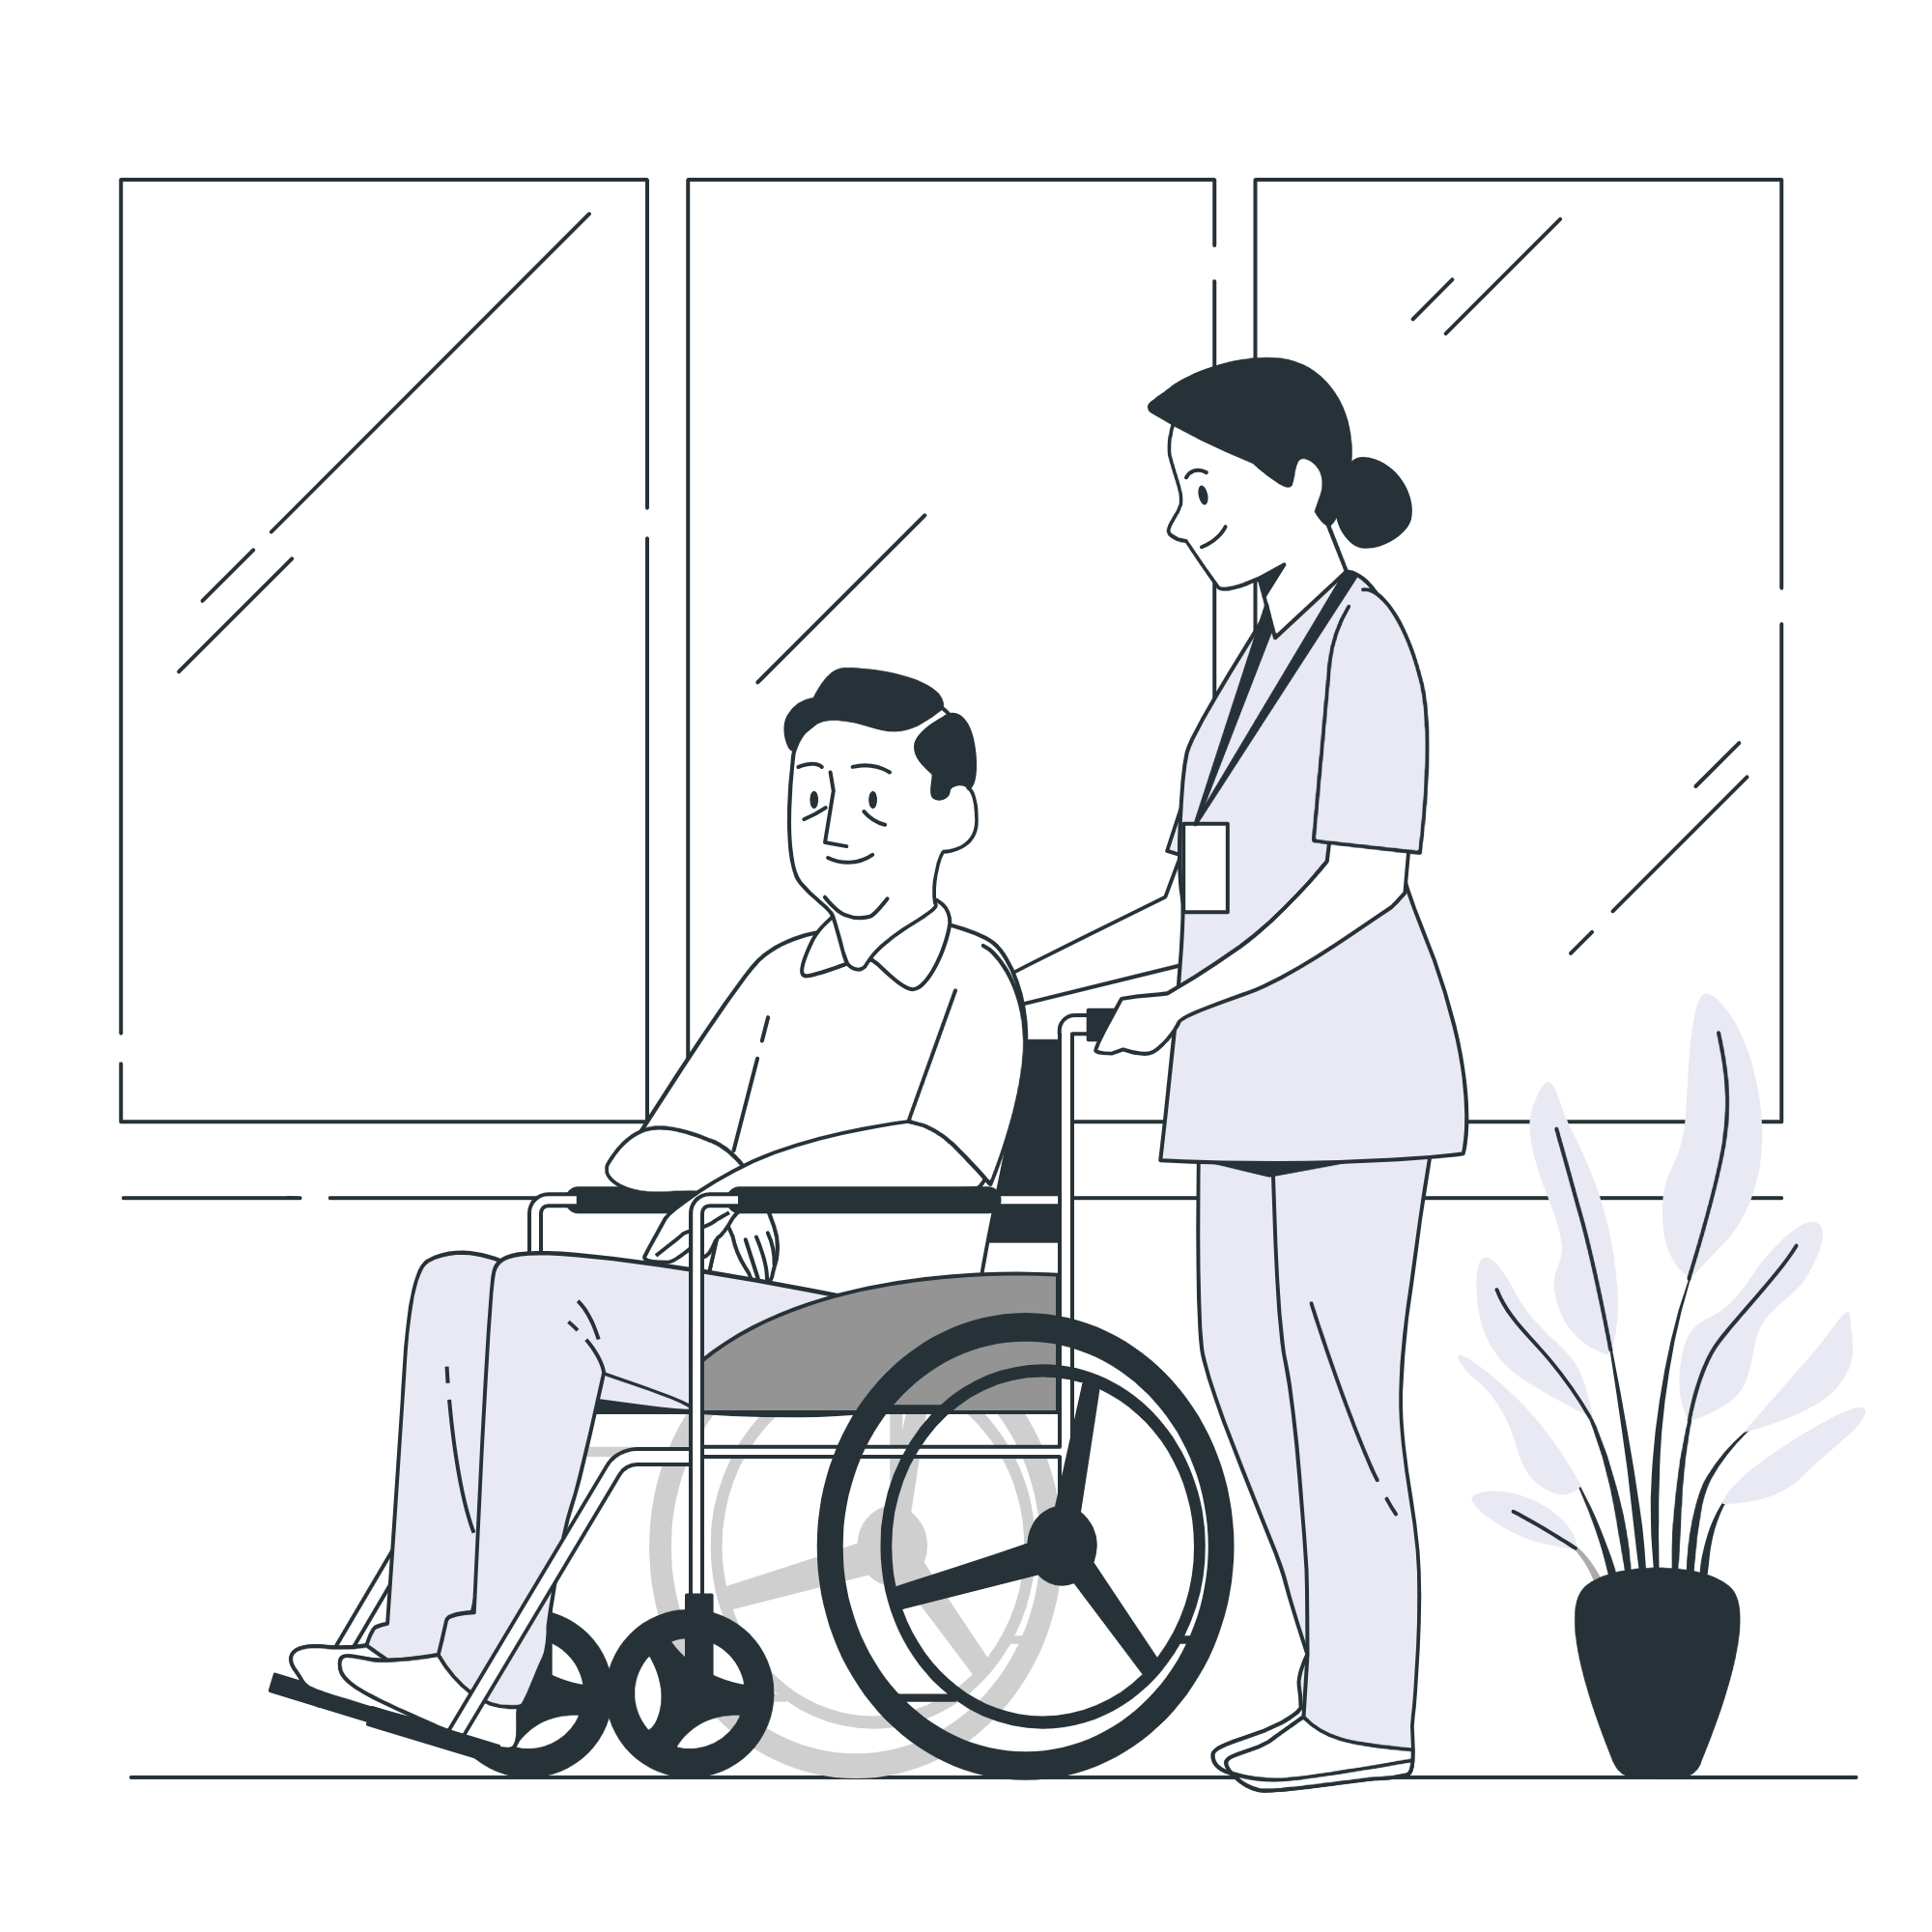 Image illustrating senior transportation services: Depicts a caregiver assisting a senior patient during transportation, ensuring safety and comfort throughout the journey.